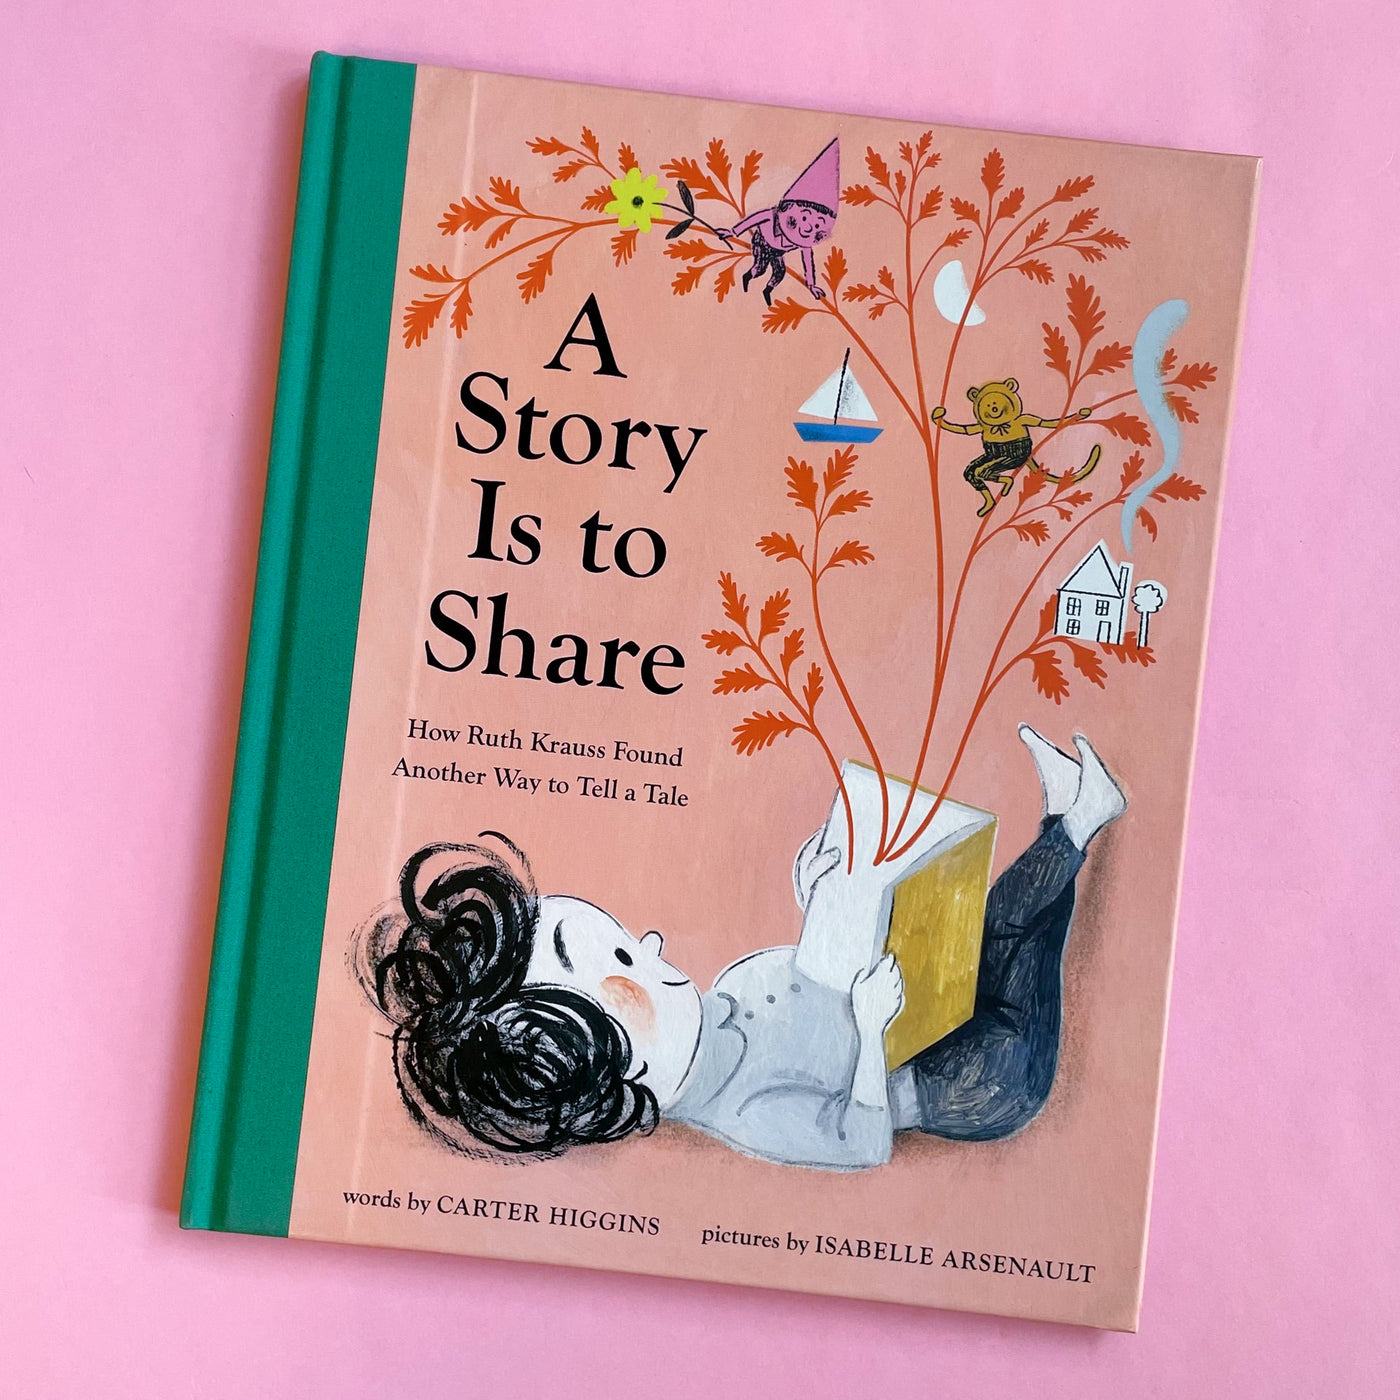 A Story Is to Share: How Ruth Krauss Found Another Way to Tell a Tale by Carter Higgins and Isabelle Arsenault